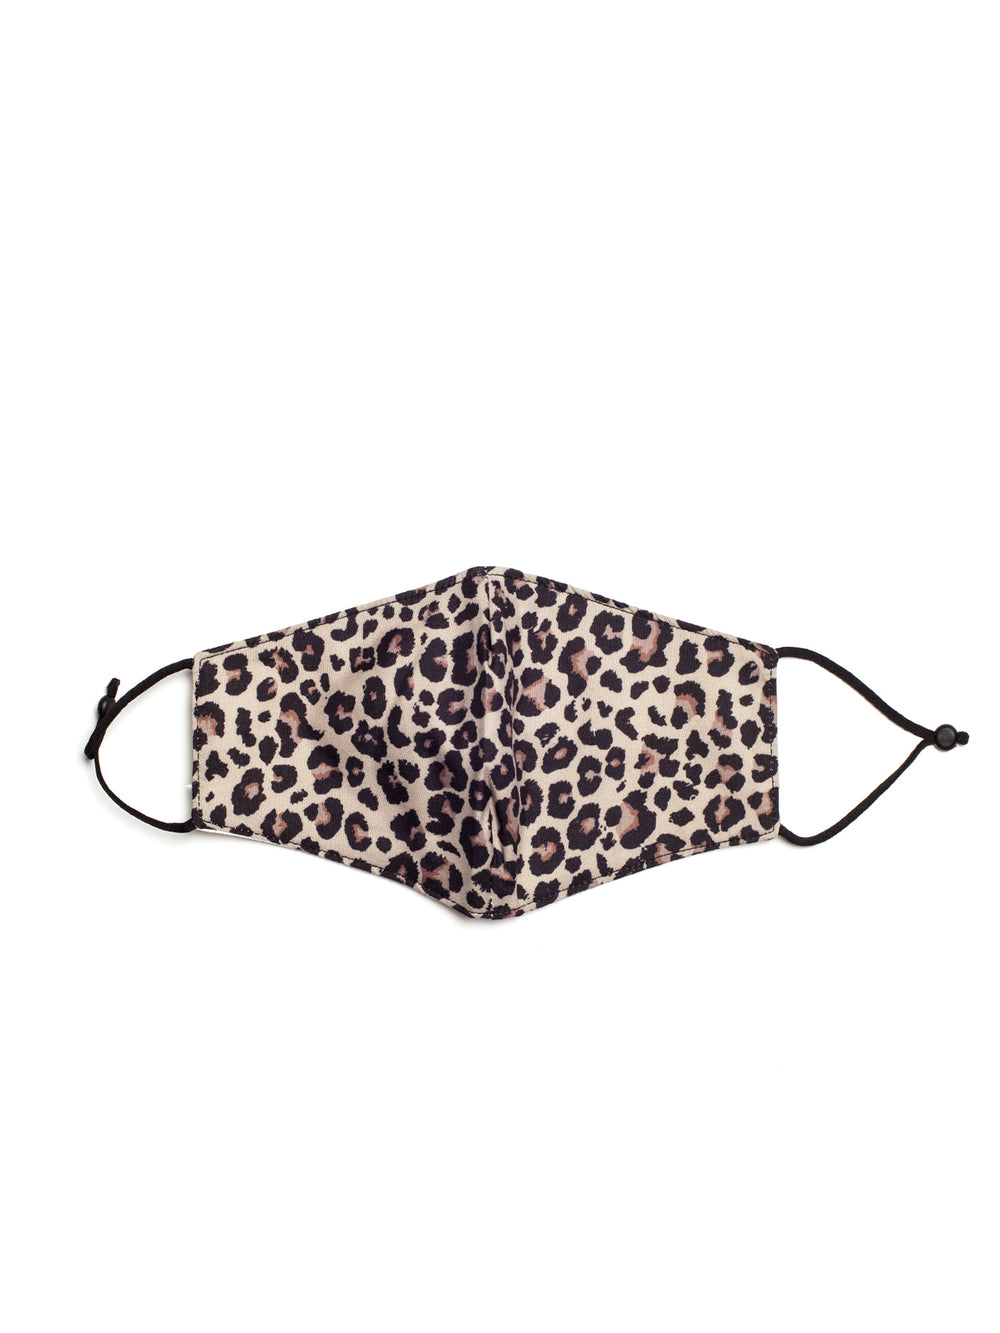 SCOUT & TRAIL FACE MASK - LEOPARD - CLEARANCE